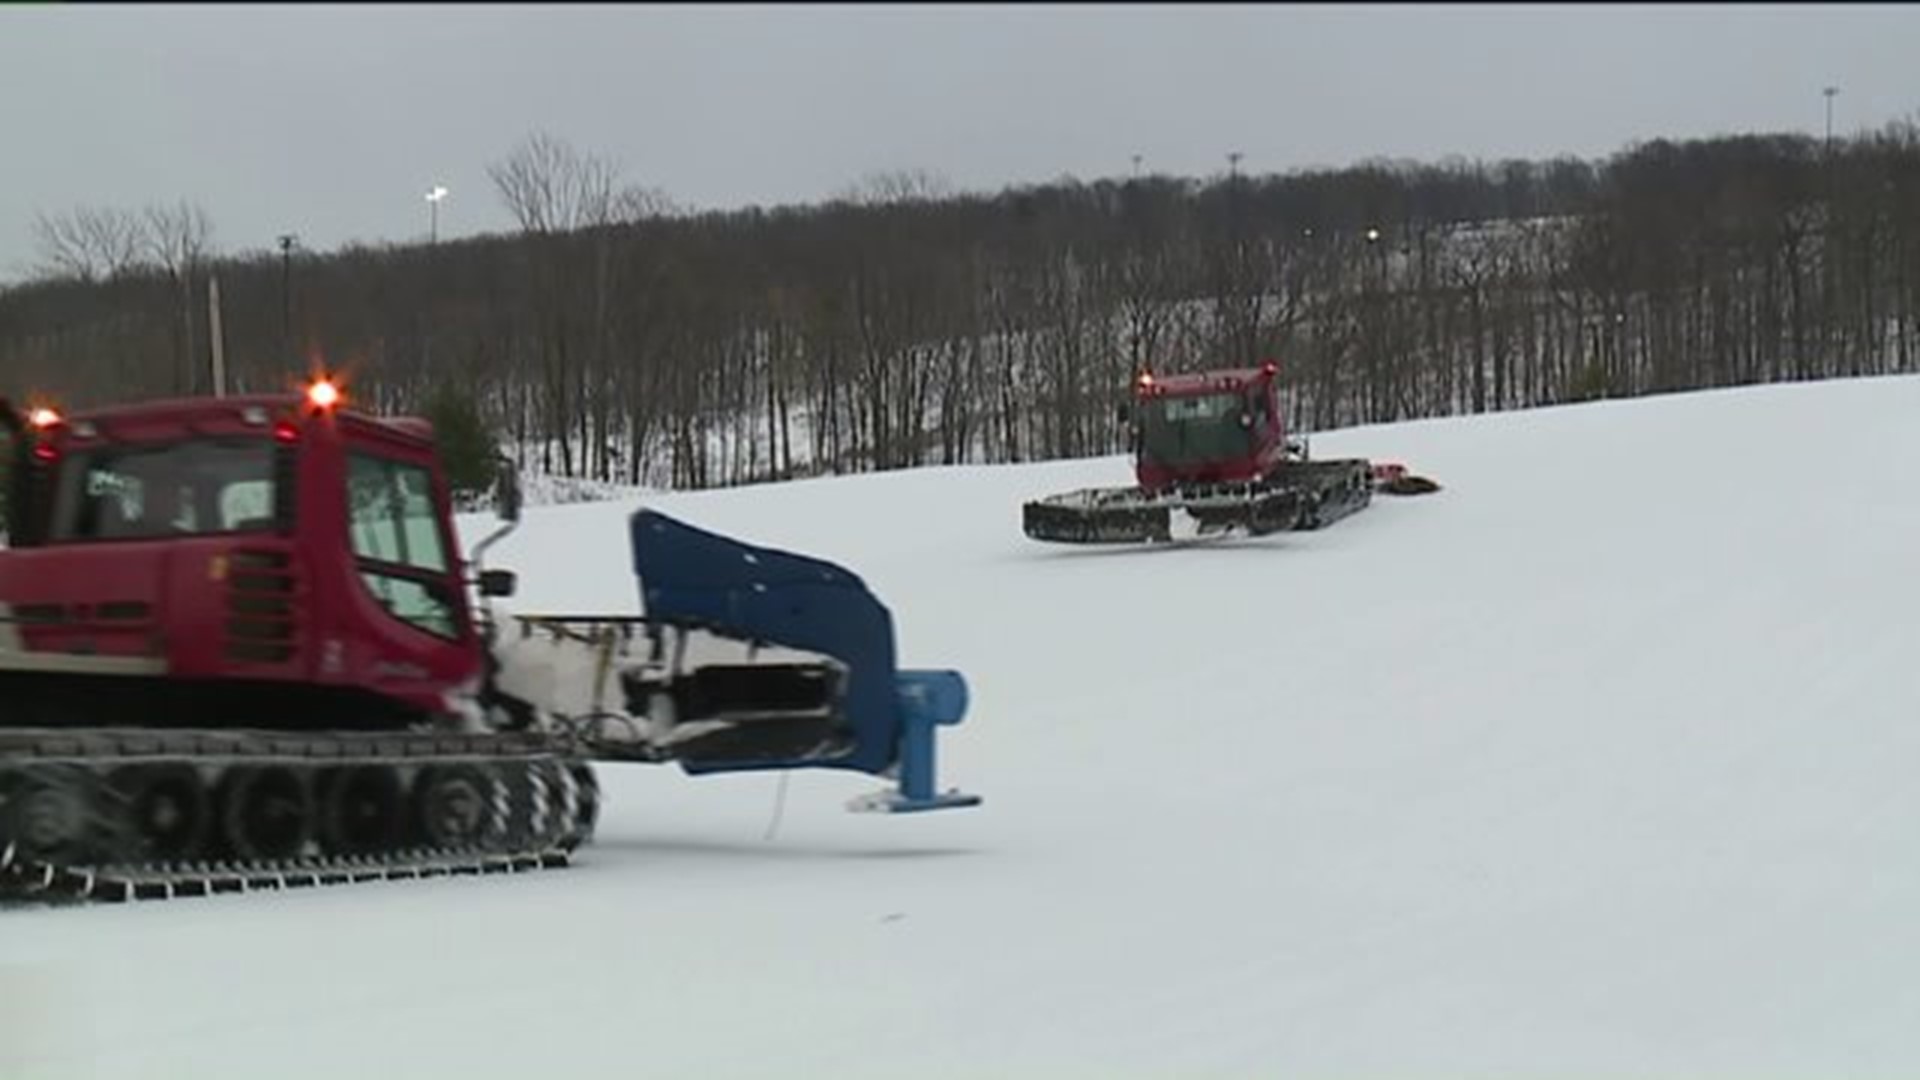 Cold Weather, Early Ski Season Great For Some Businesses